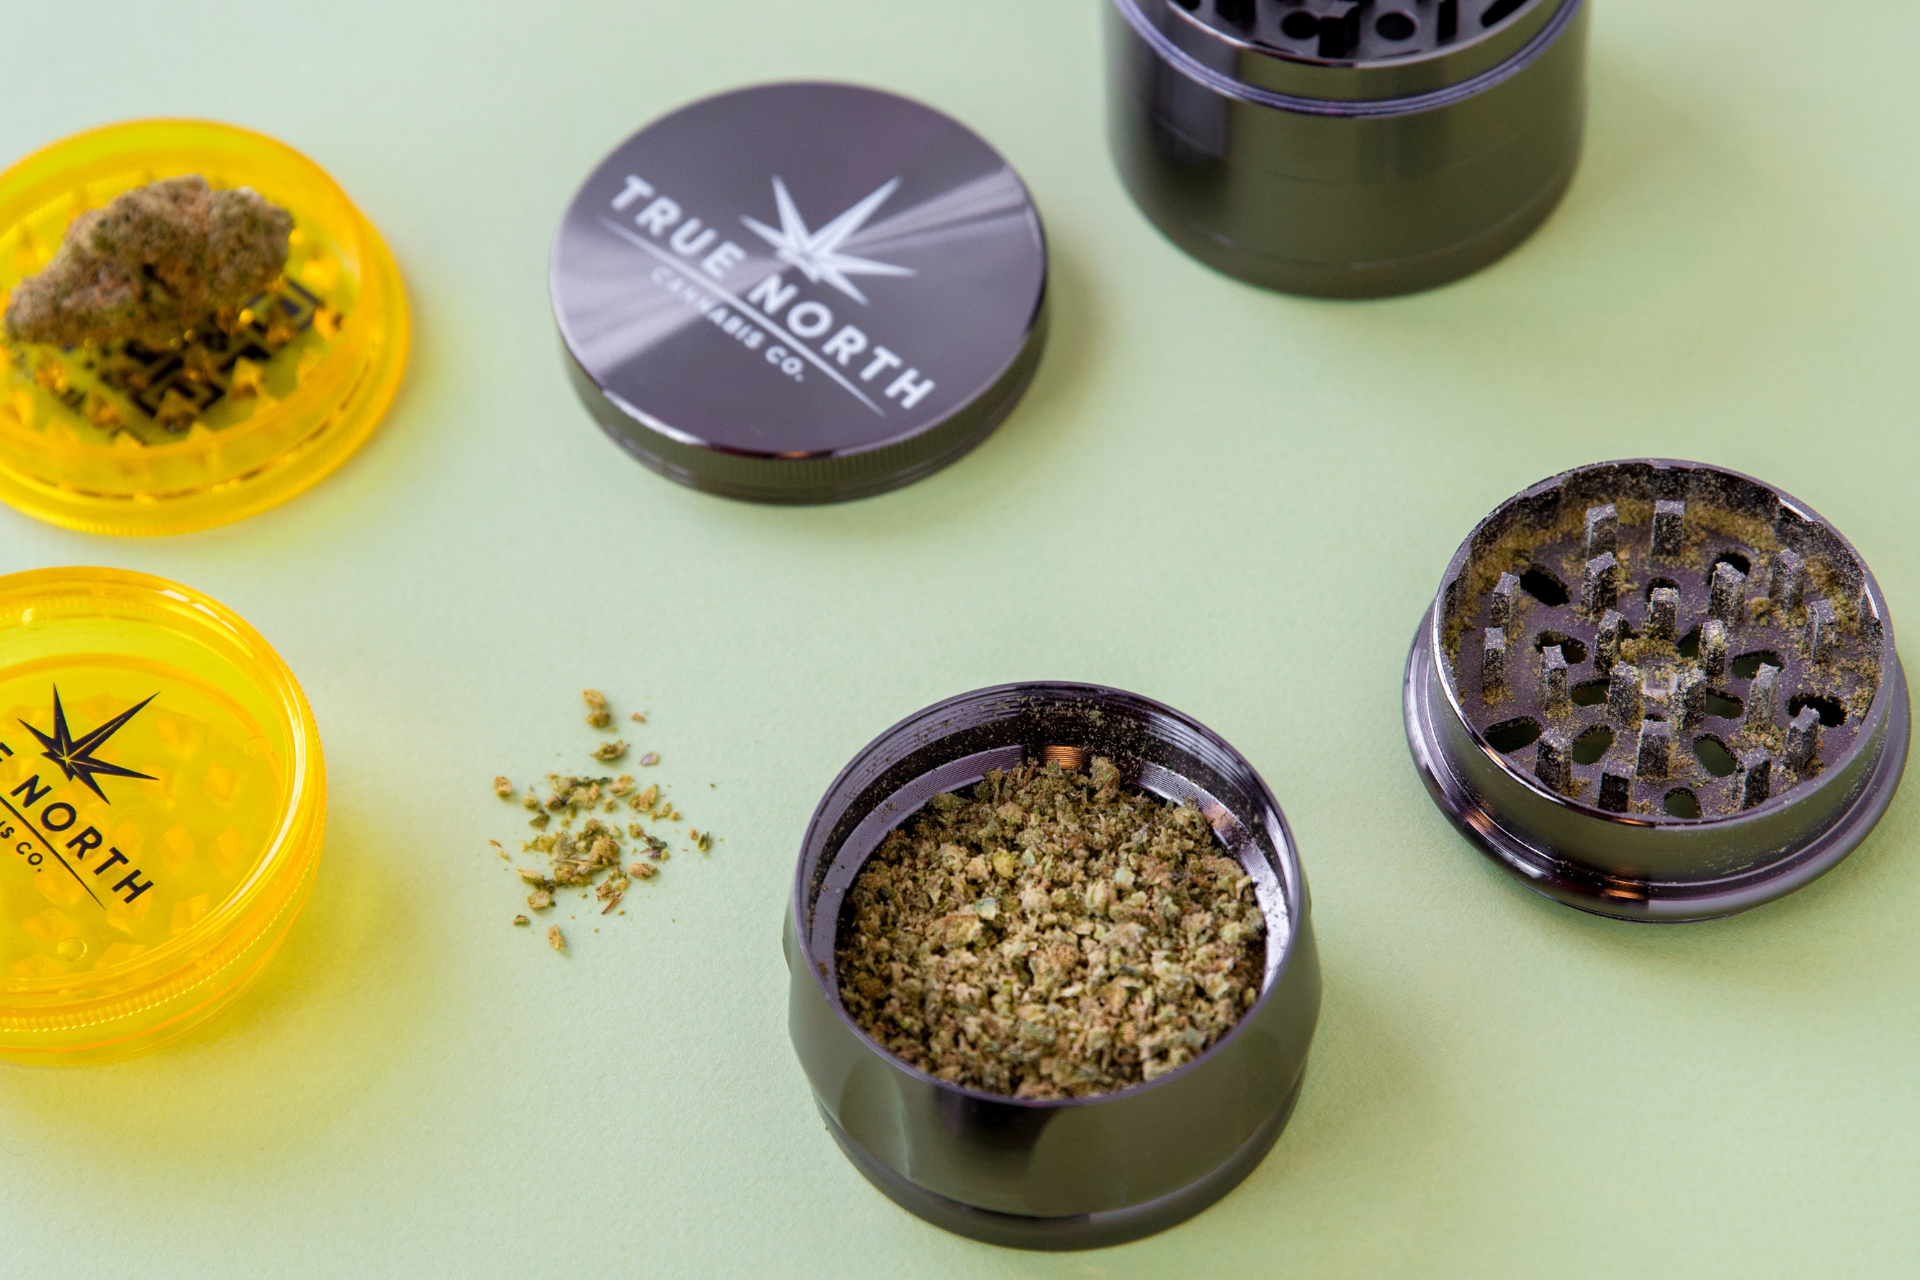 True North Cannabis Co. branded grinders with cannabis ground in them